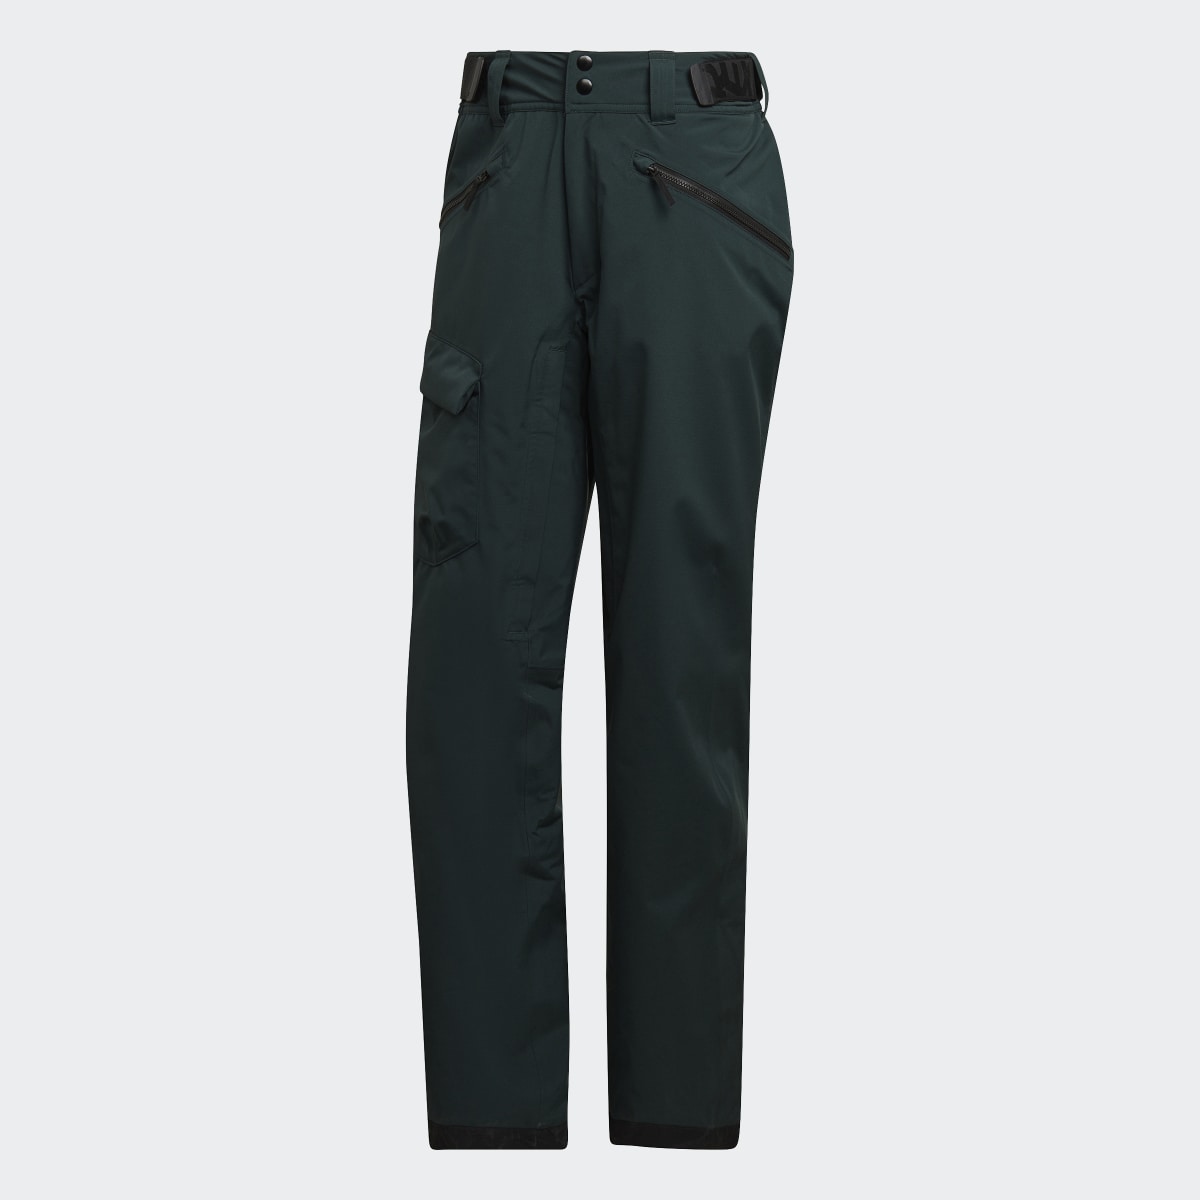 Adidas TERREX RESORT TWO LAYER INSULATED SNOW PANTS. 4